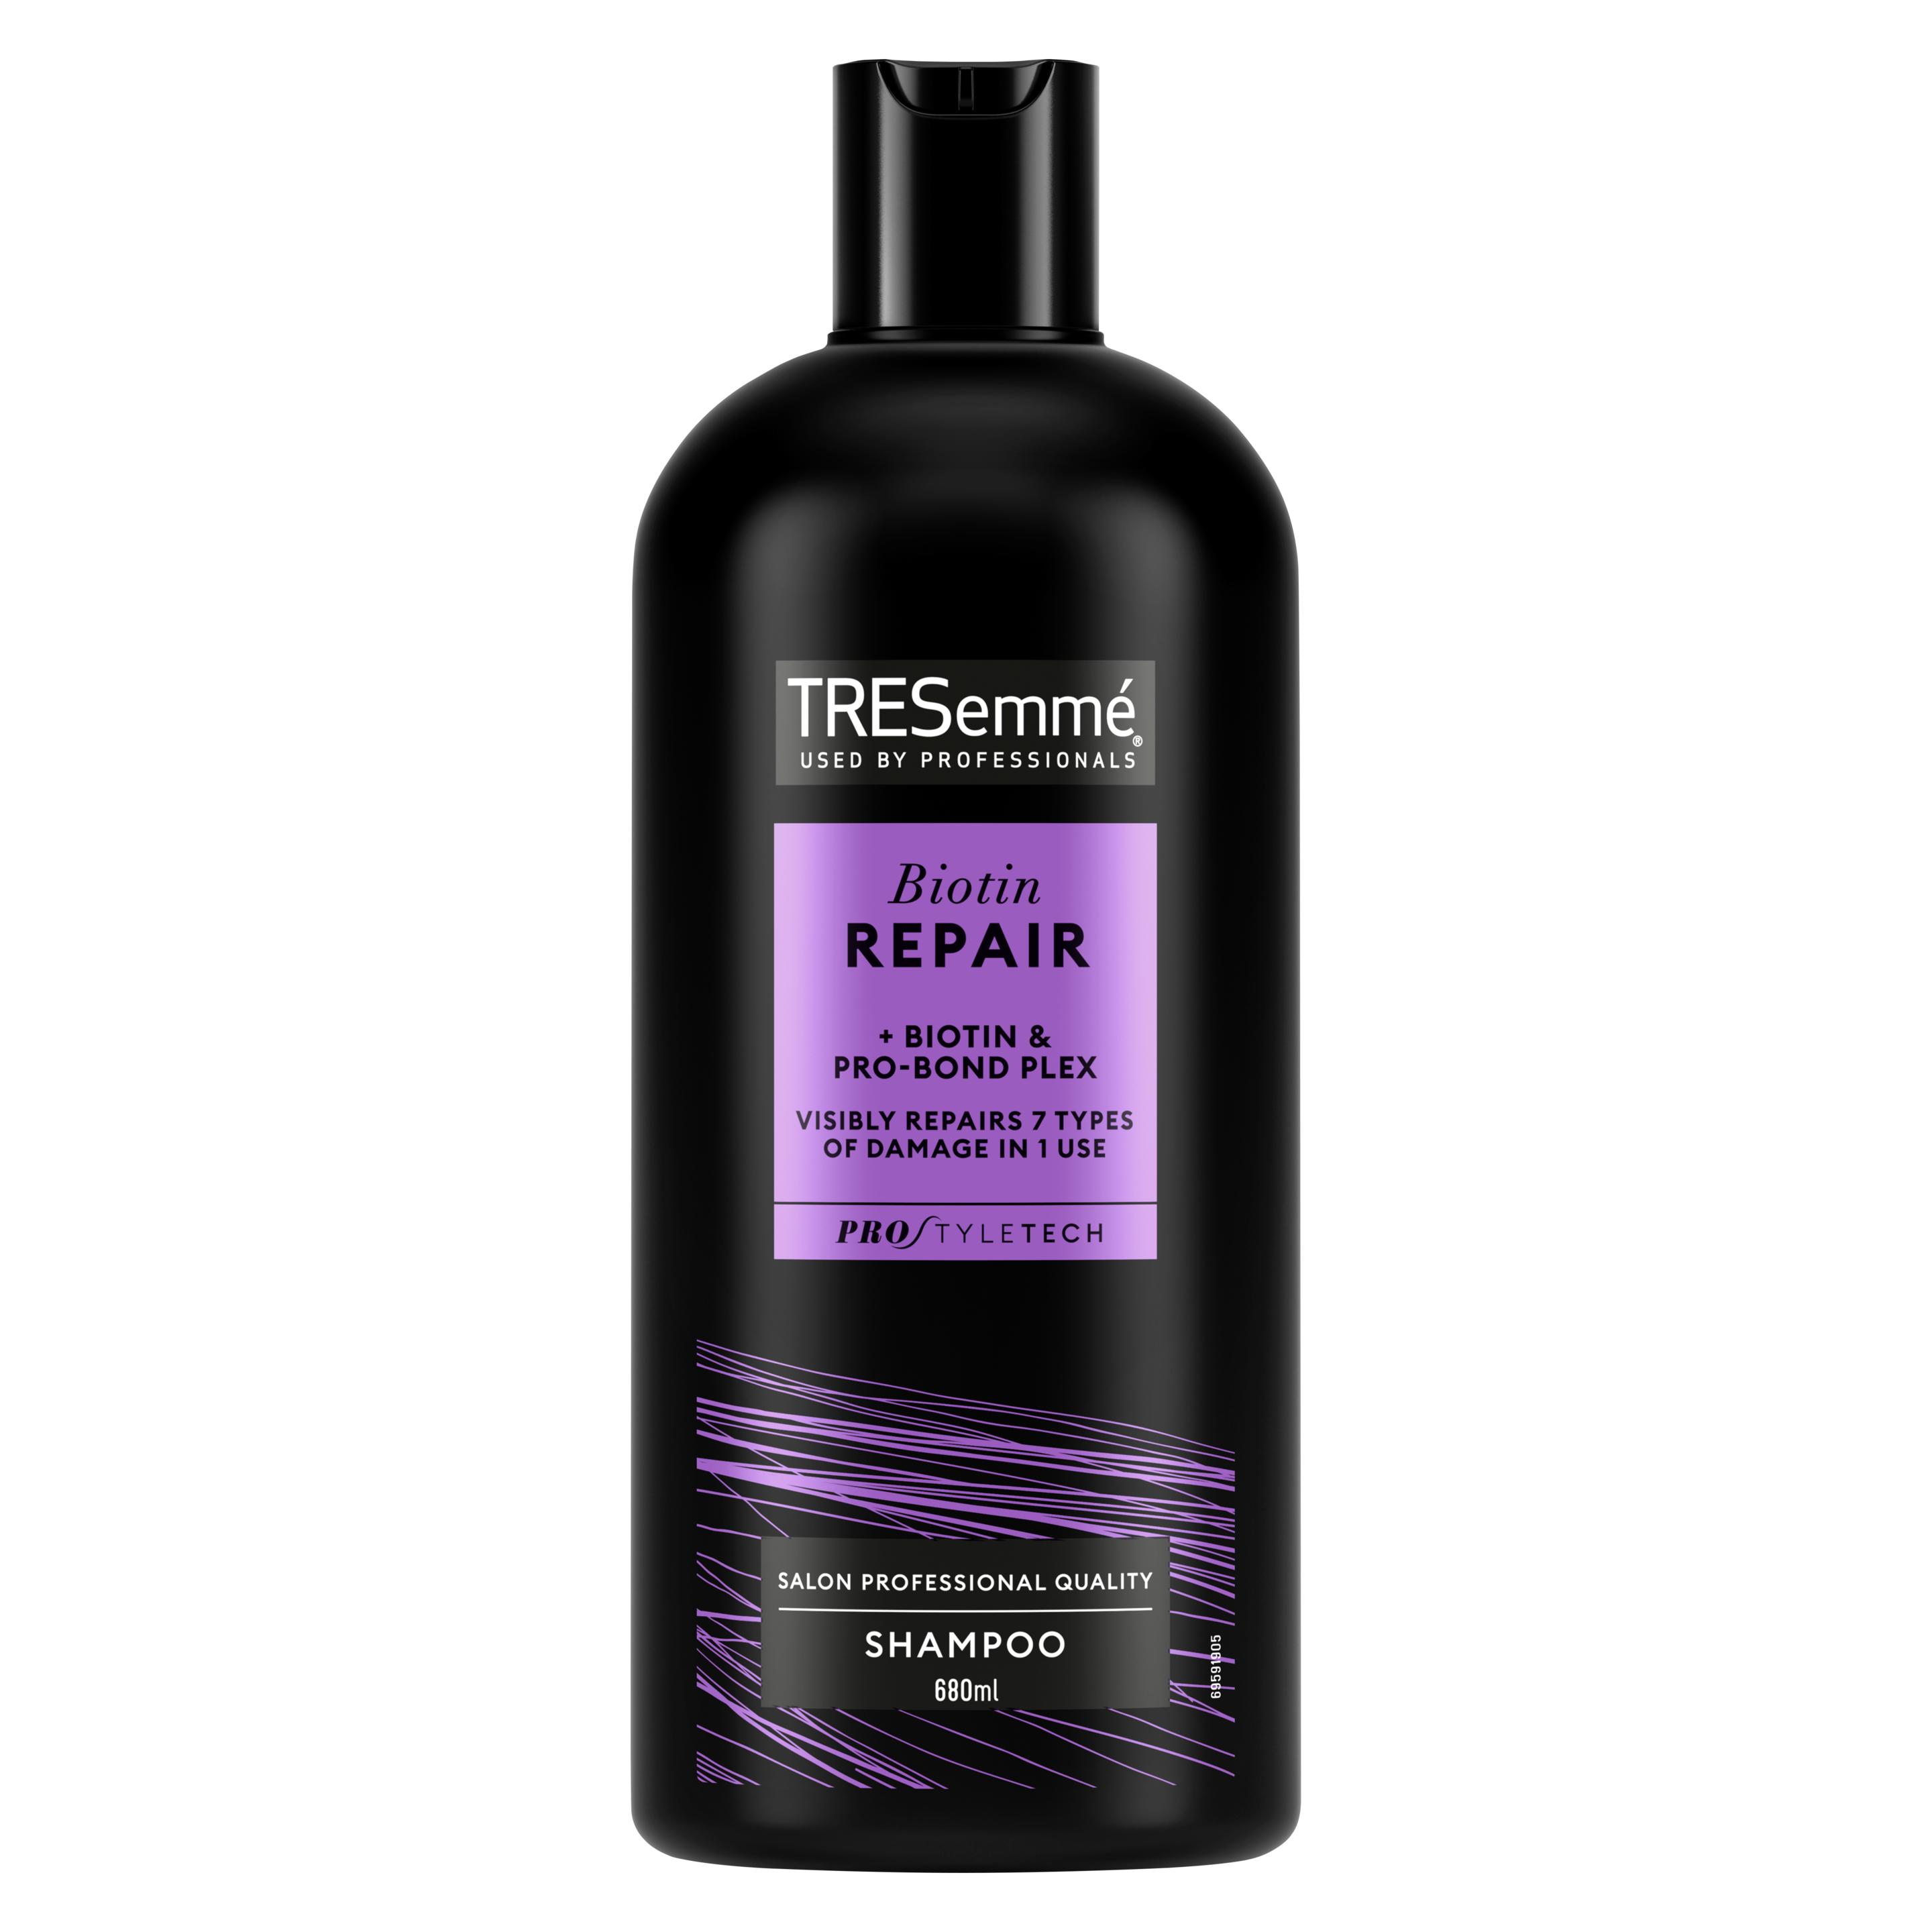 TRESemme  Biotin Repair visibly repairs 7 types of damage in one use Shampoo for dry, damaged hair 6x 680 ml